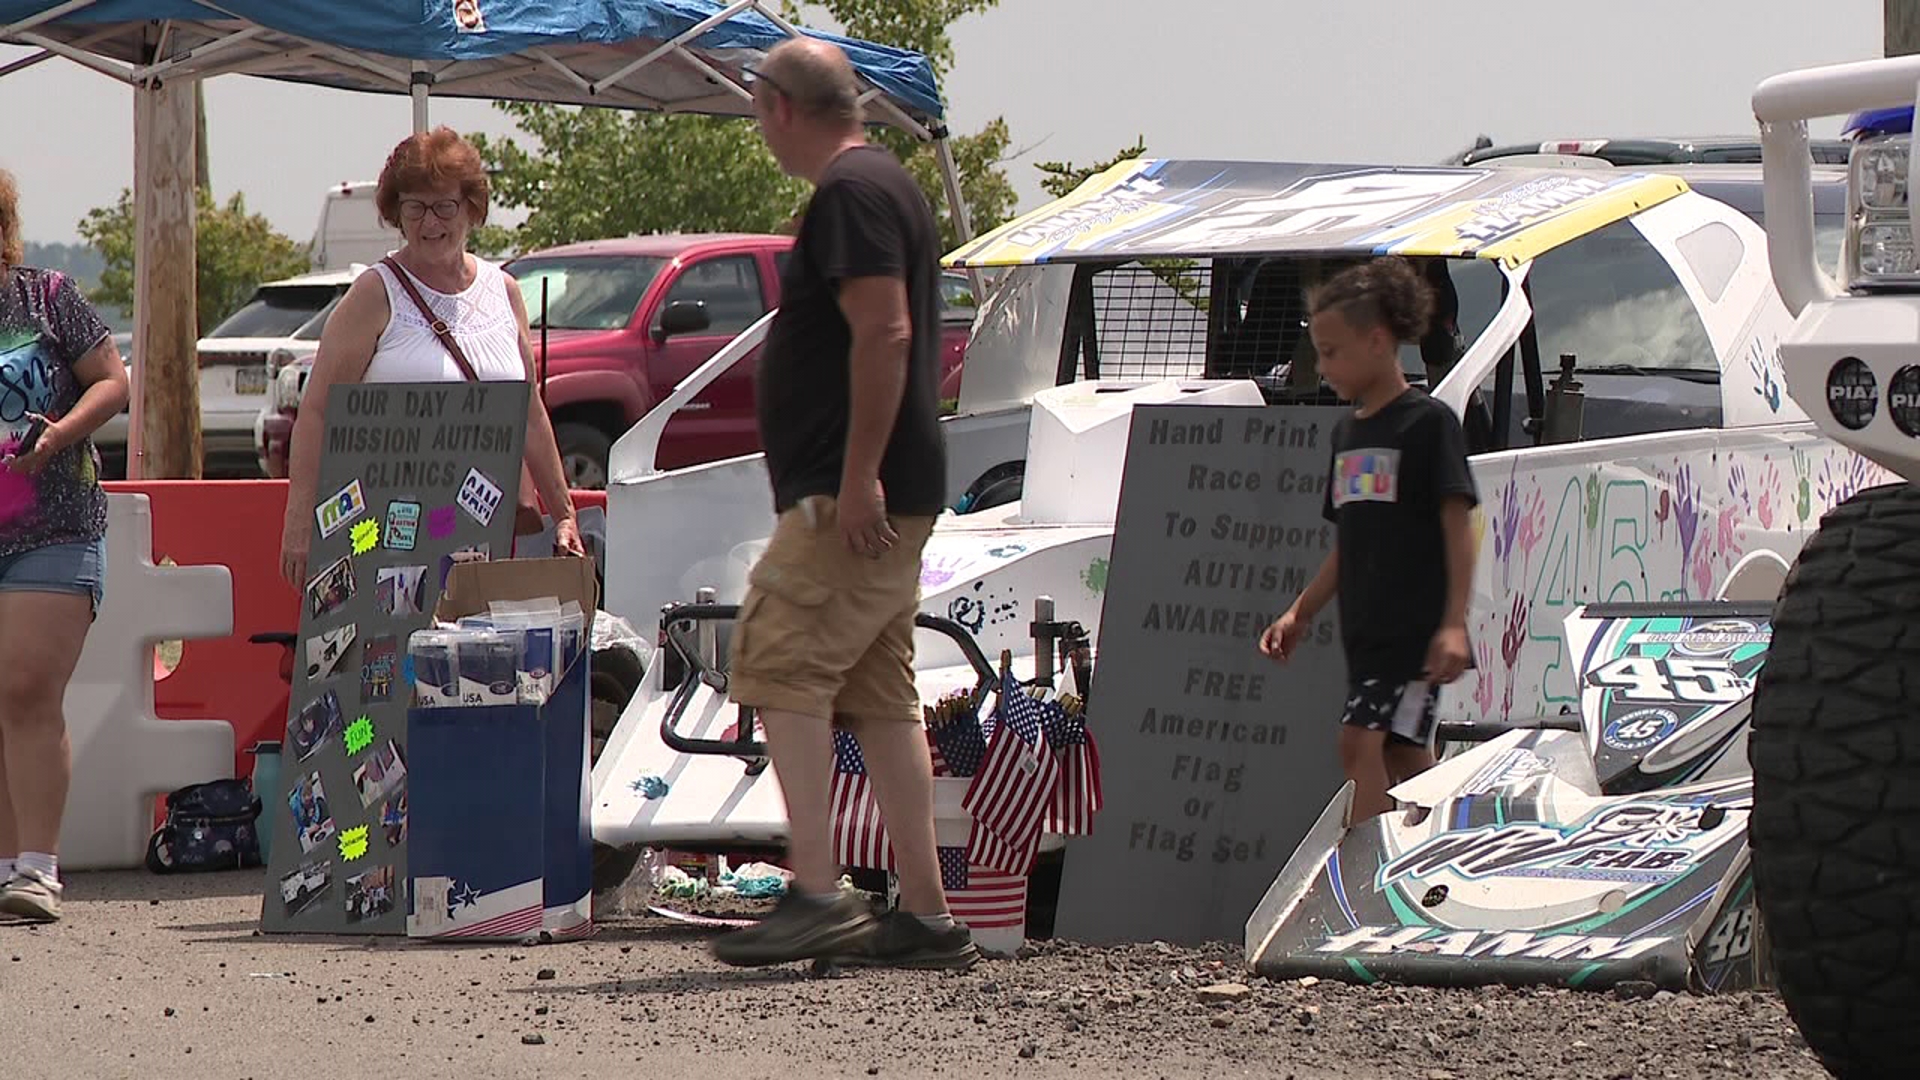 The 4th annual Independence Day Charity Event was held at City View Park in Hazleton.